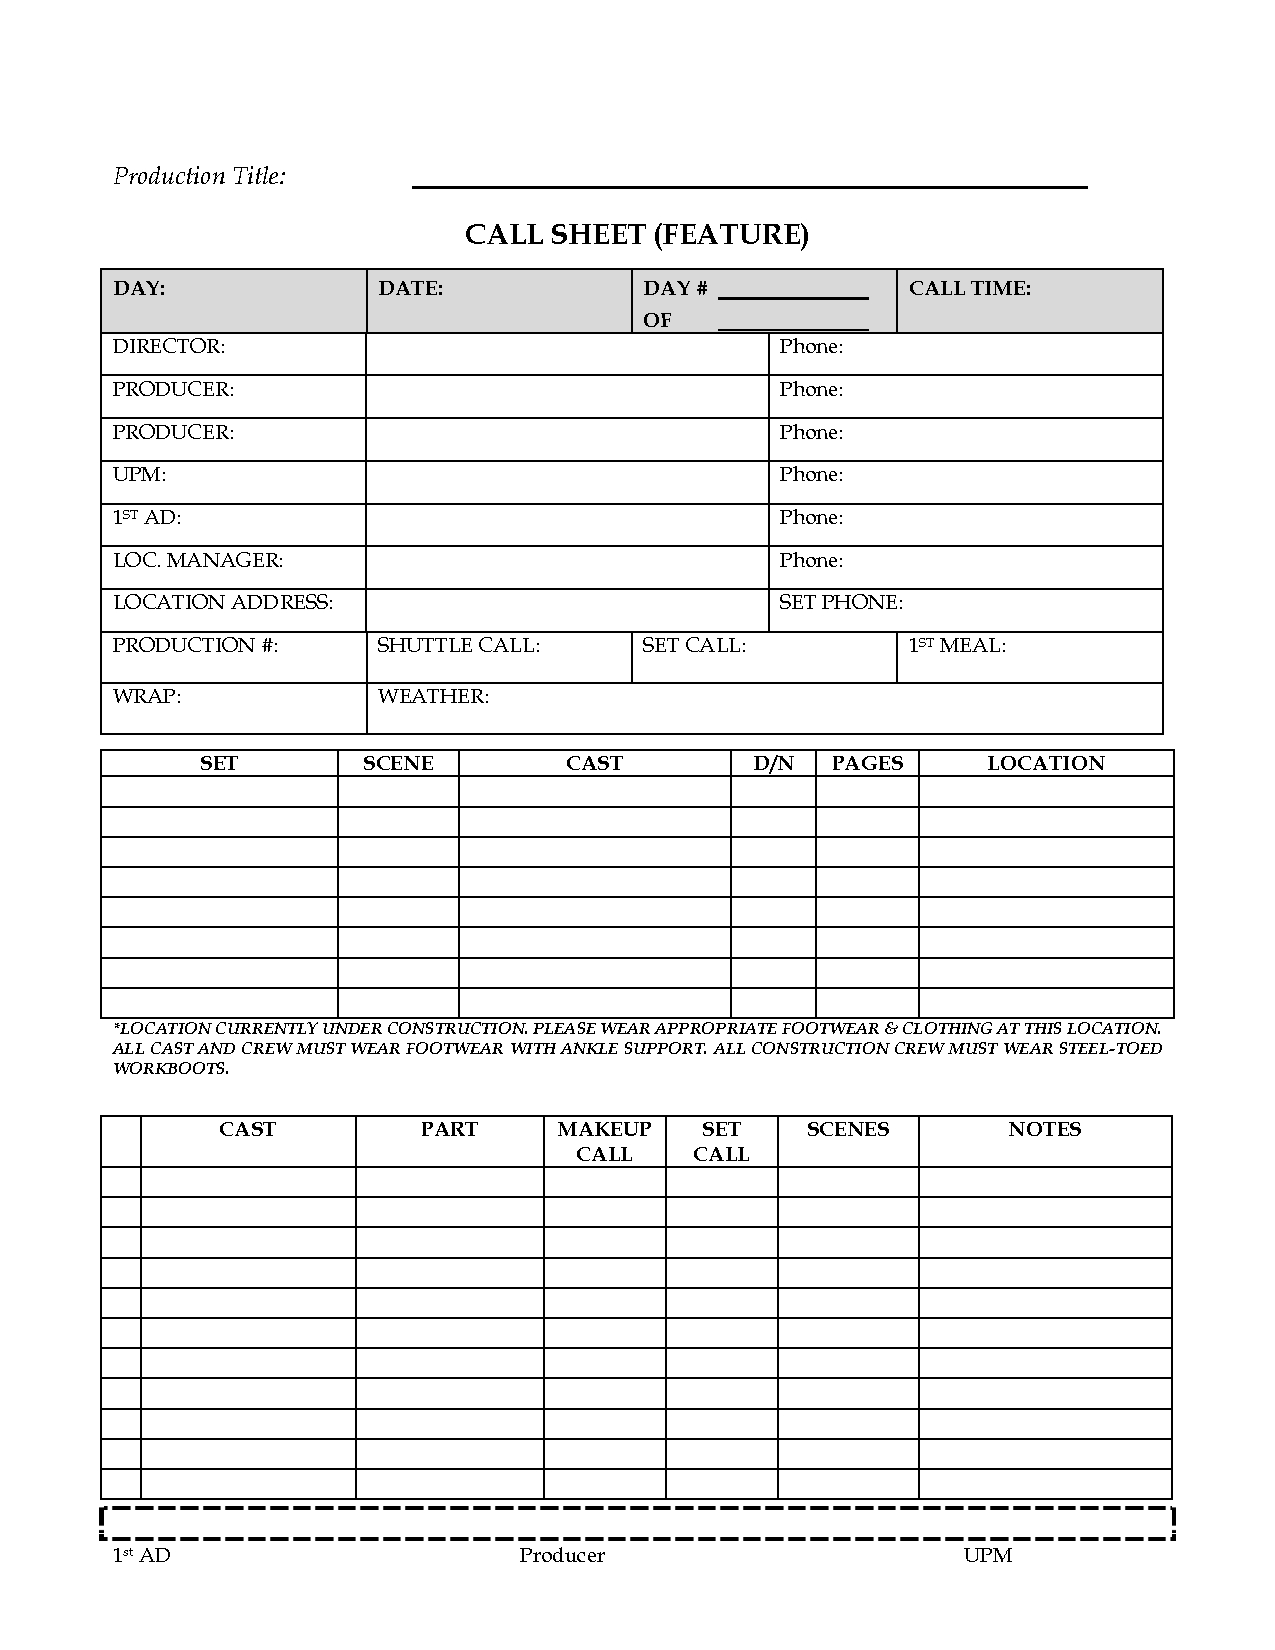 Awesome Call Sheet (Feature) Template Sample For Film With Regard To Film Call Sheet Template Word